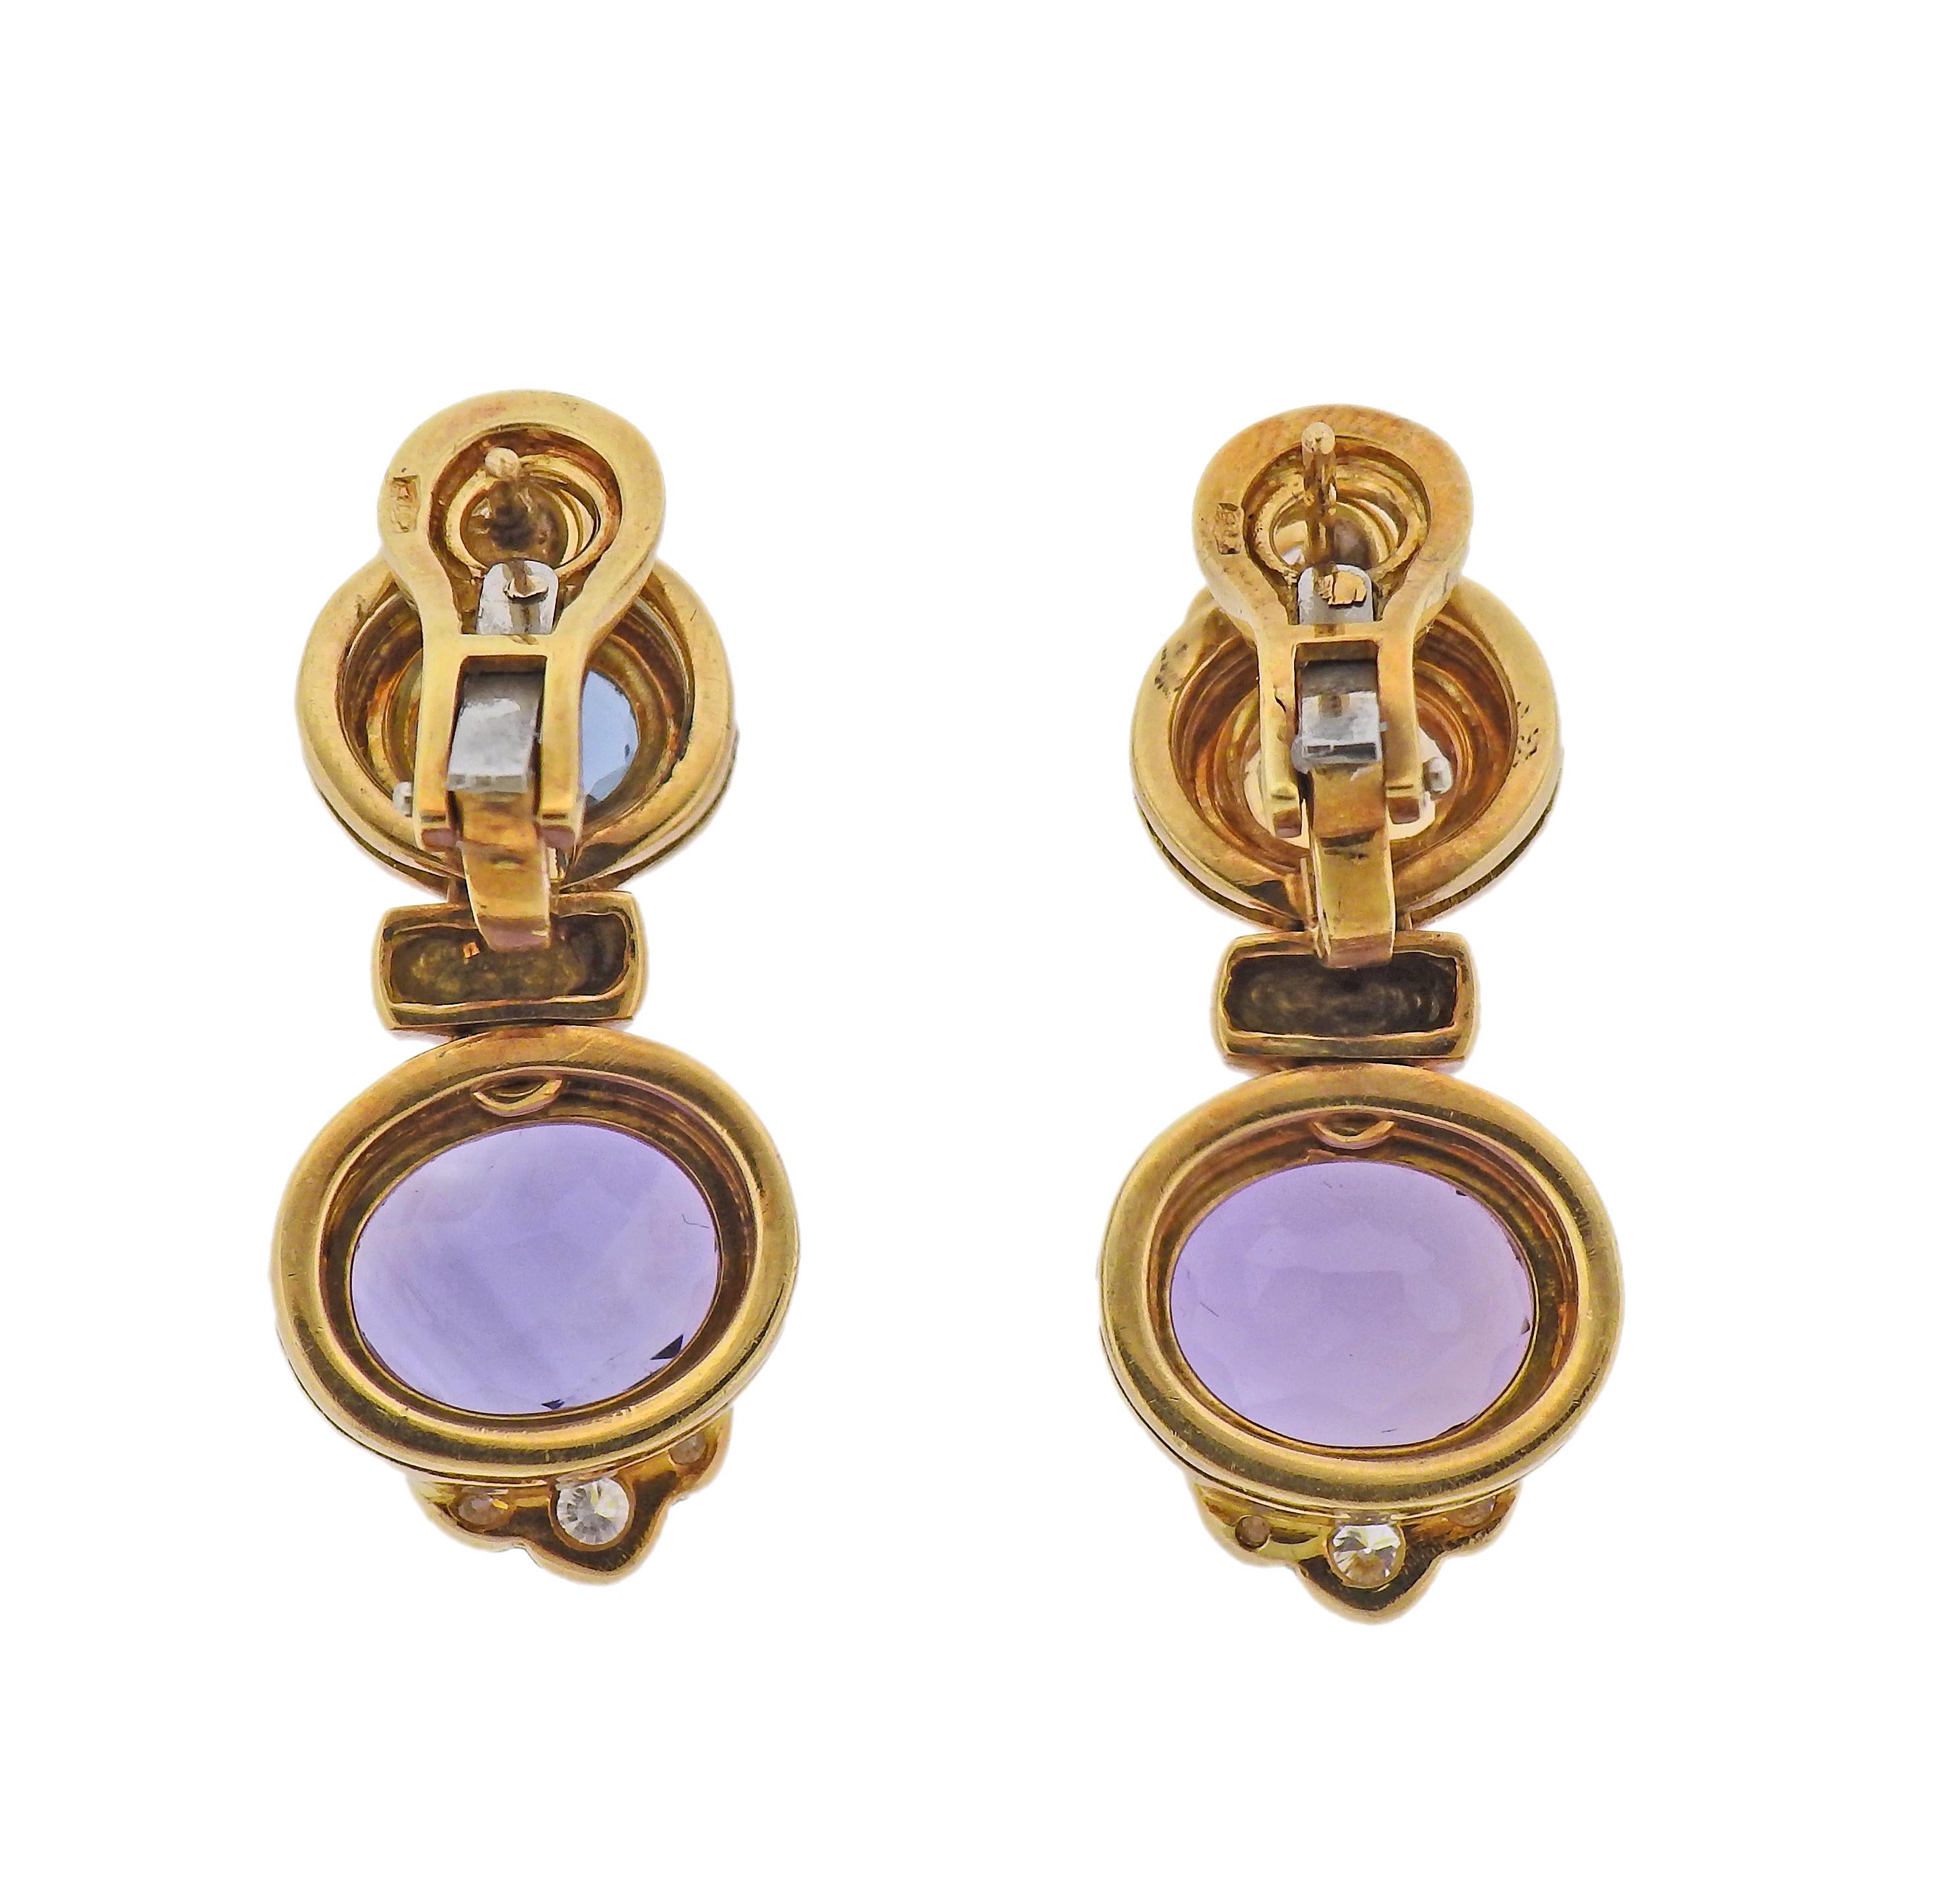 Pair of 14k gold earrings with amethyst and peridot. Earrings are 25mm x 20mm. Marked 14k. Weight - 23.2 grams.